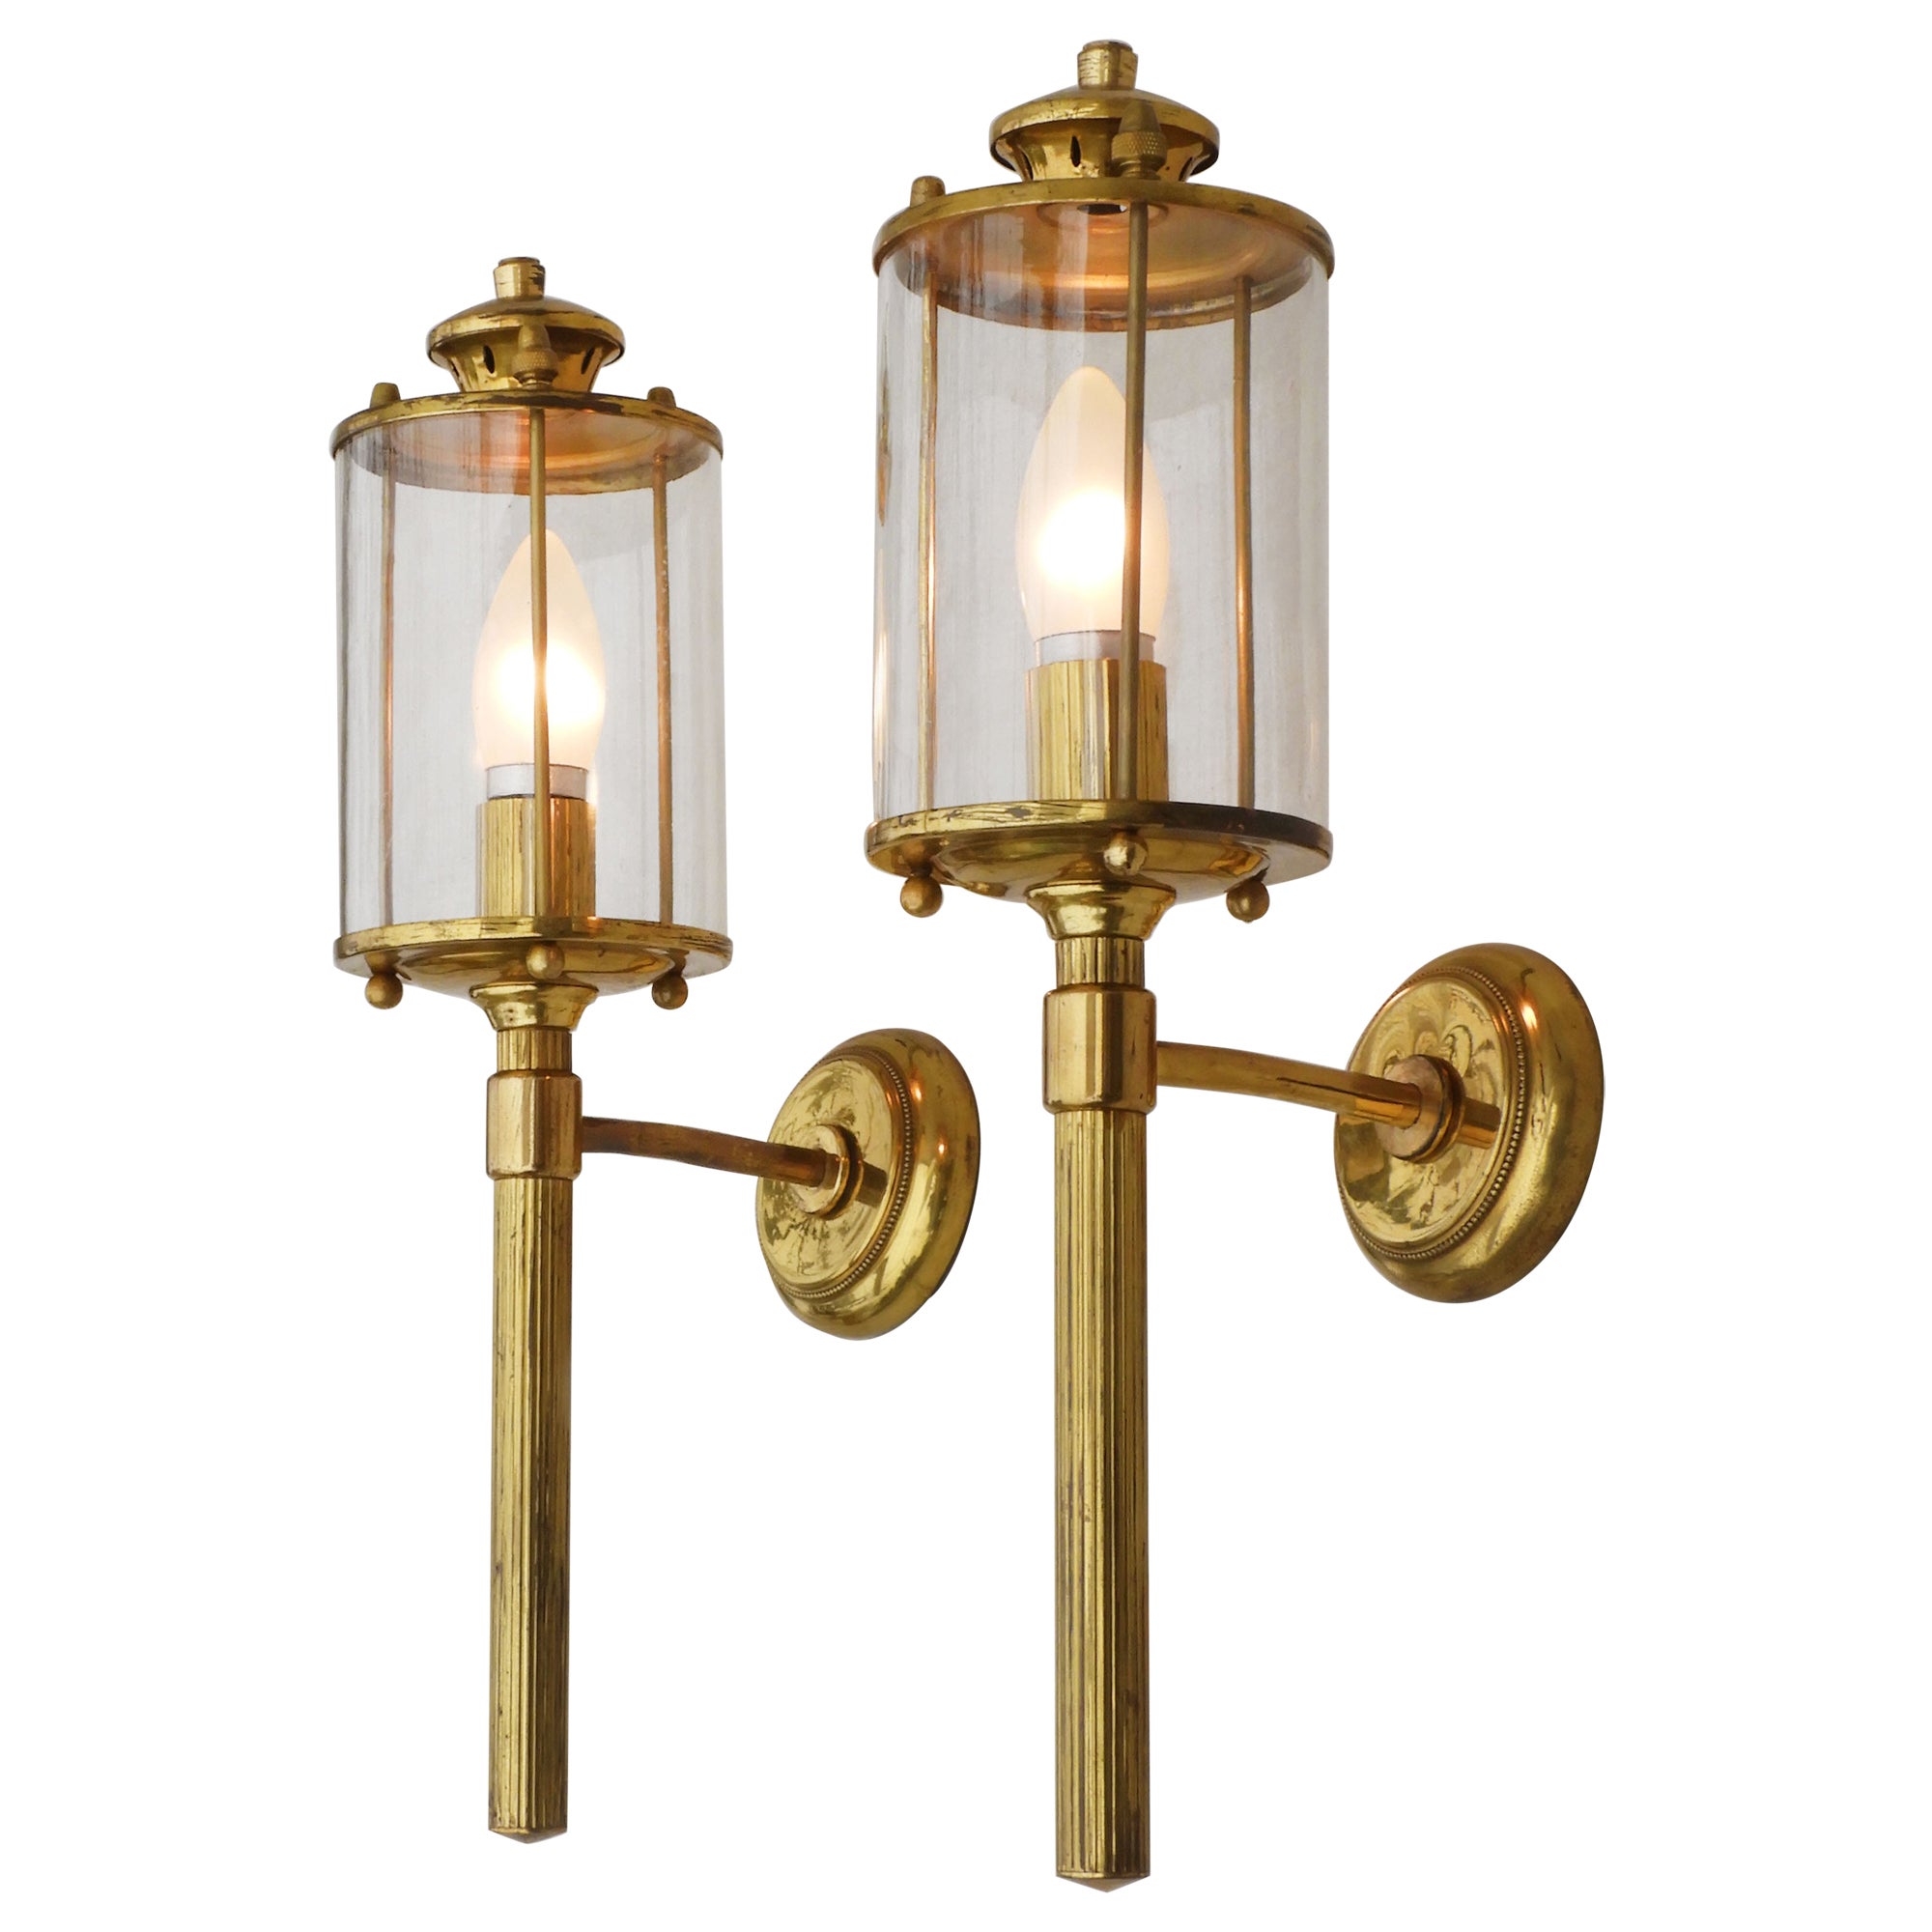 Pair of French Neoclassical Maison Jansen Style Brass Wall Sconce Lanterns C1950